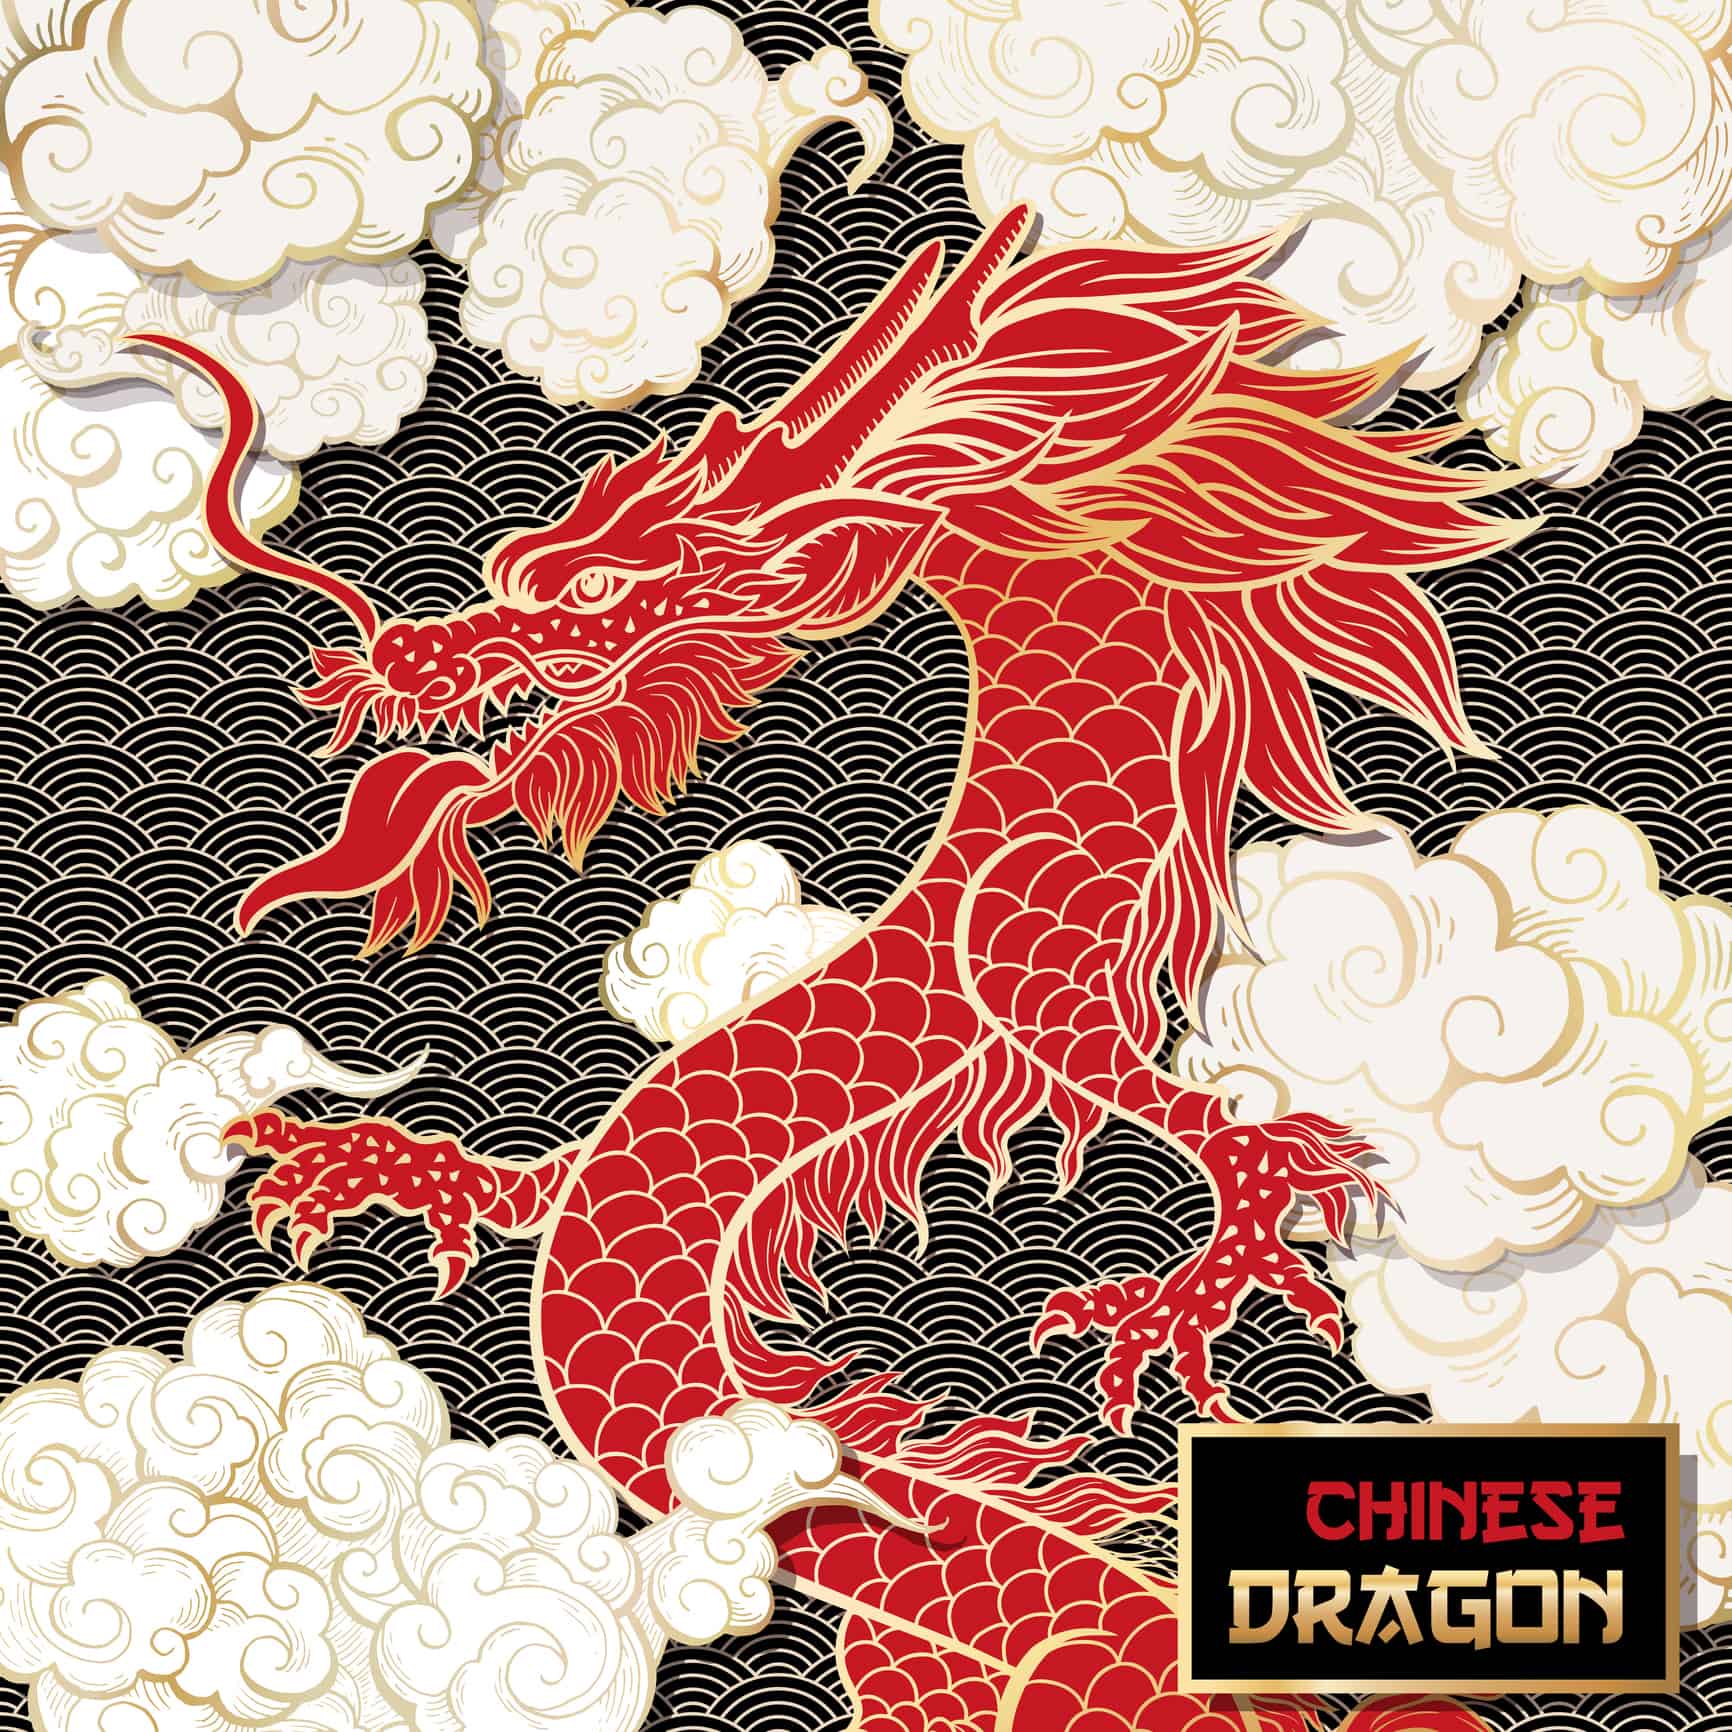 Chinese dragon personalities are passionate and creative